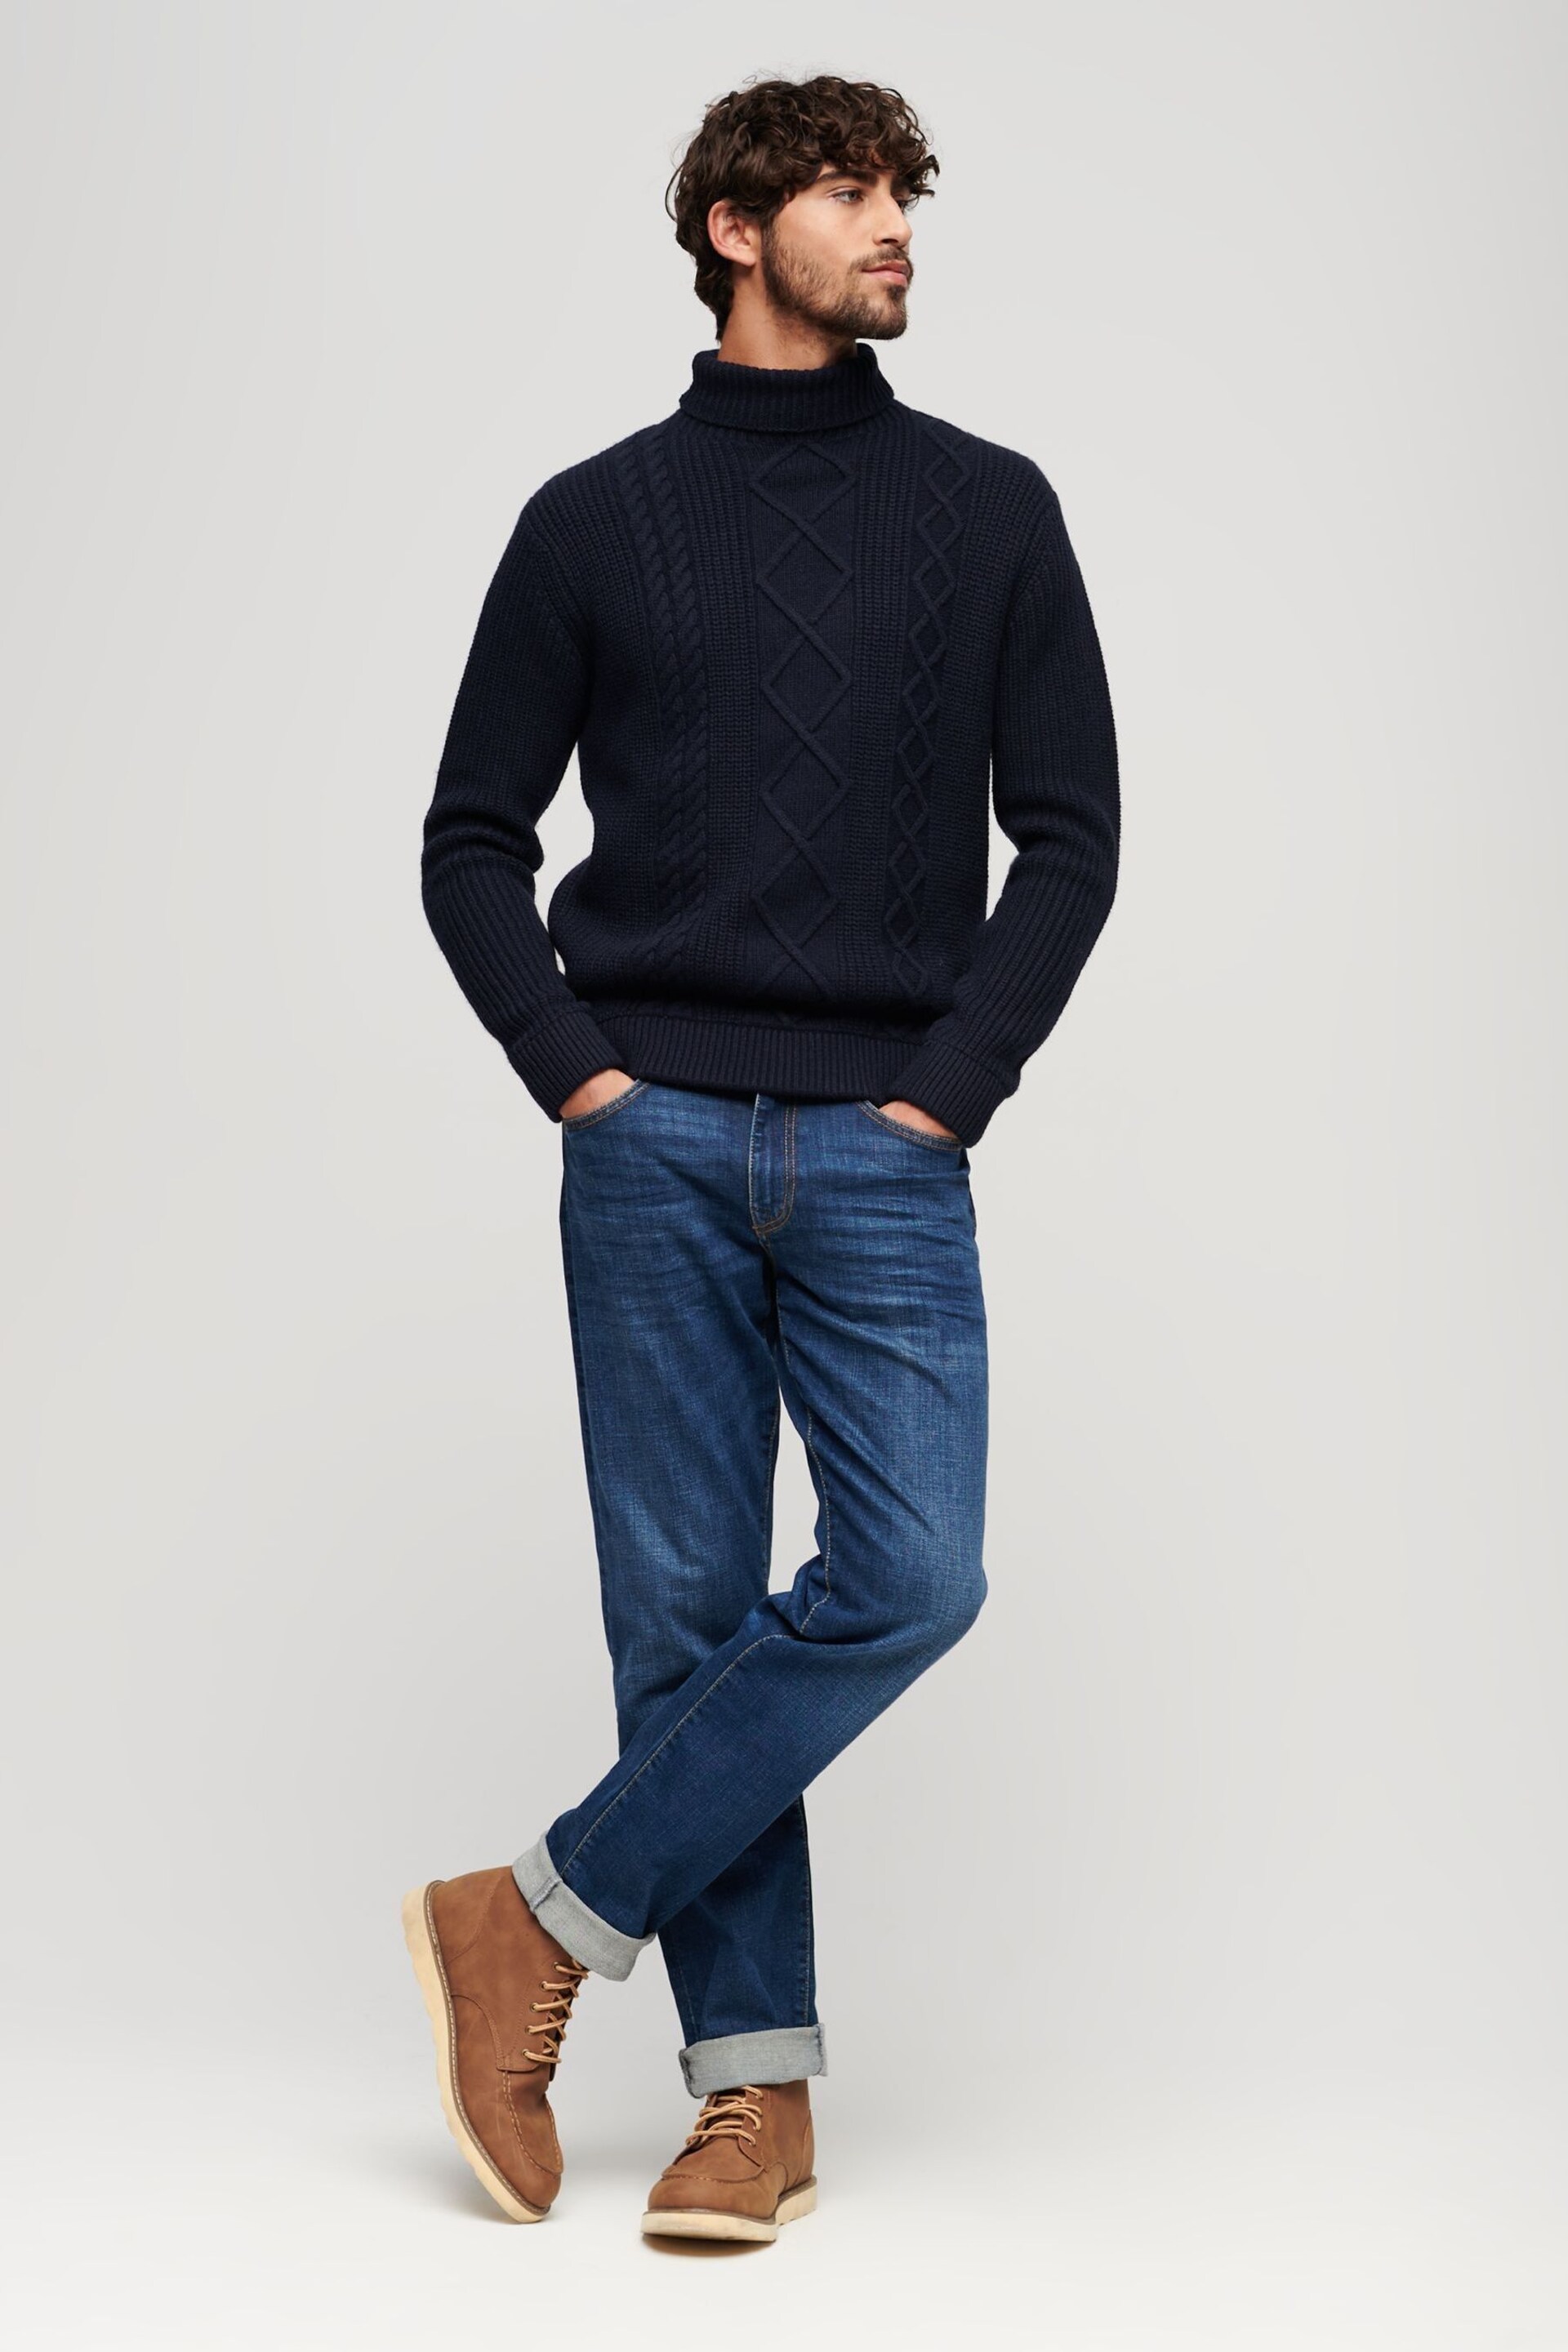 Superdry Blue The Merchant Store Cable Roll Neck Jumper - Image 2 of 3